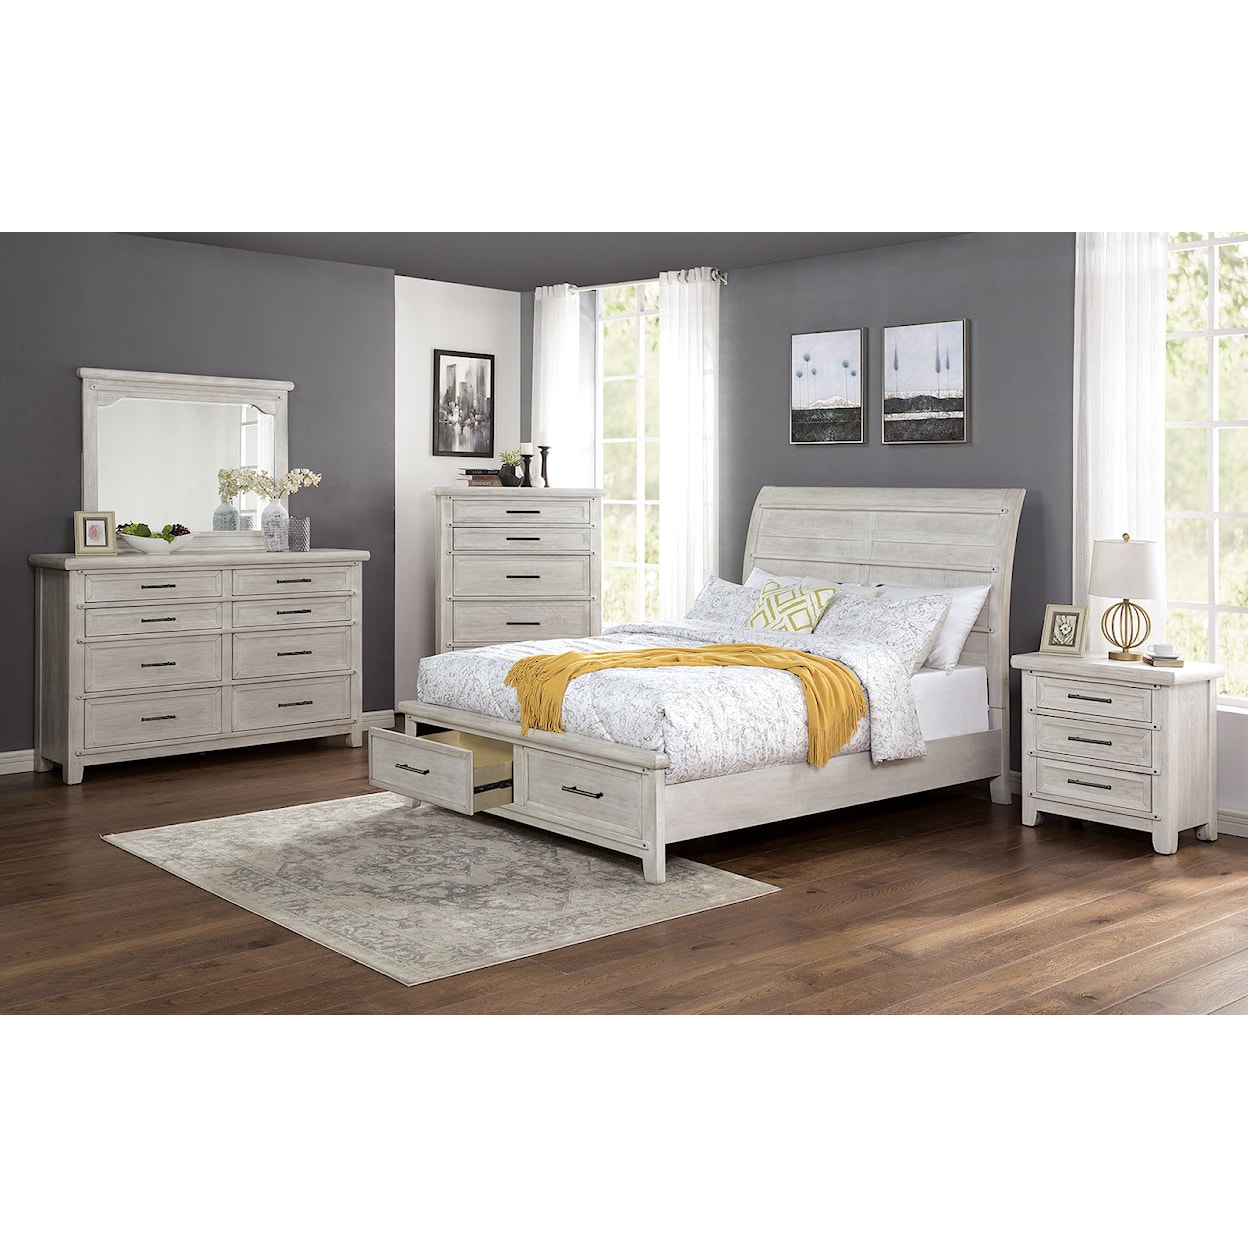 Furniture of America Shawnette Queen Bed